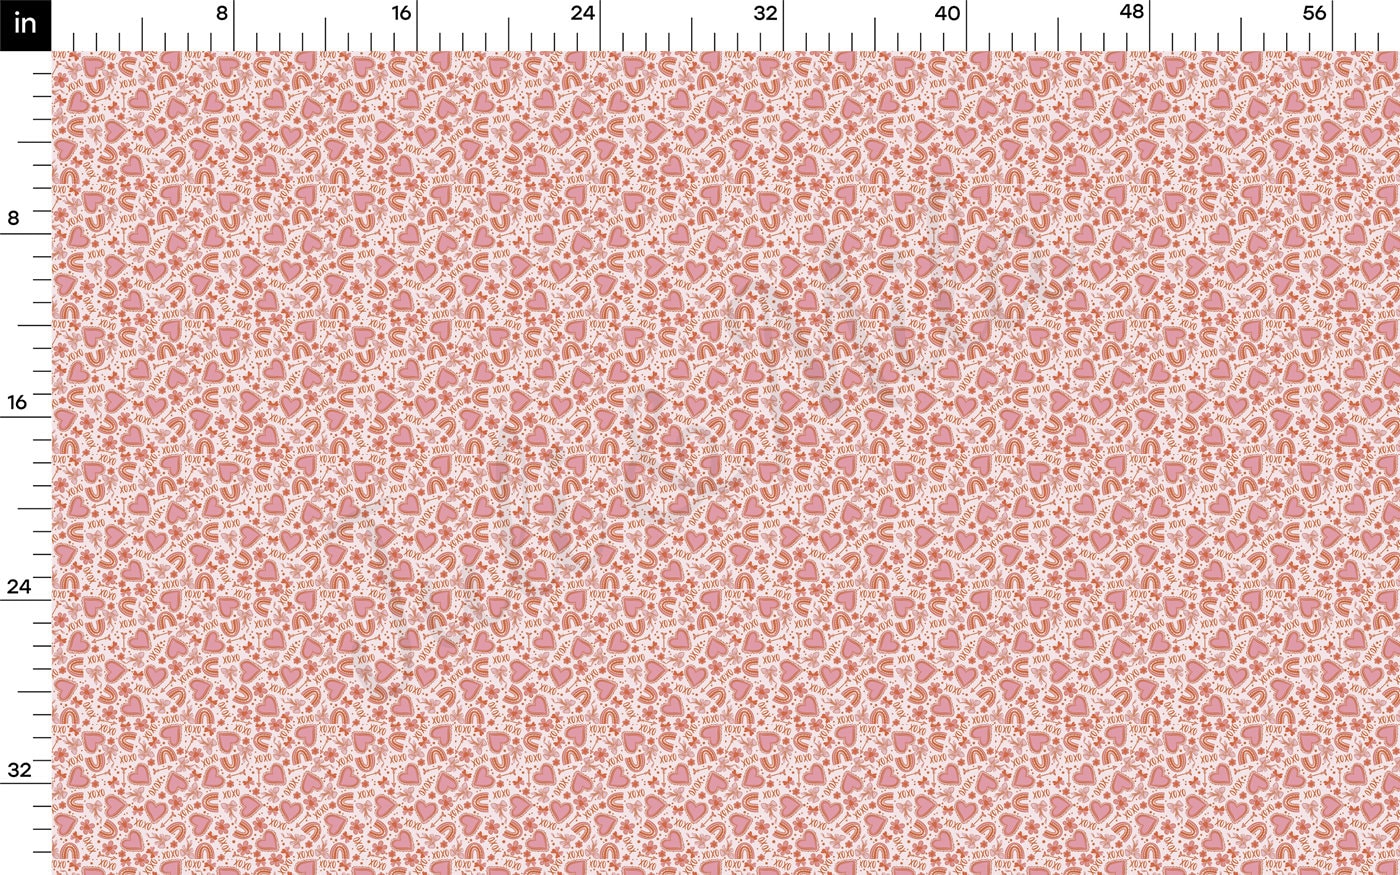 DBP Fabric Double Brushed Polyester DBP2218 Valentine's Day